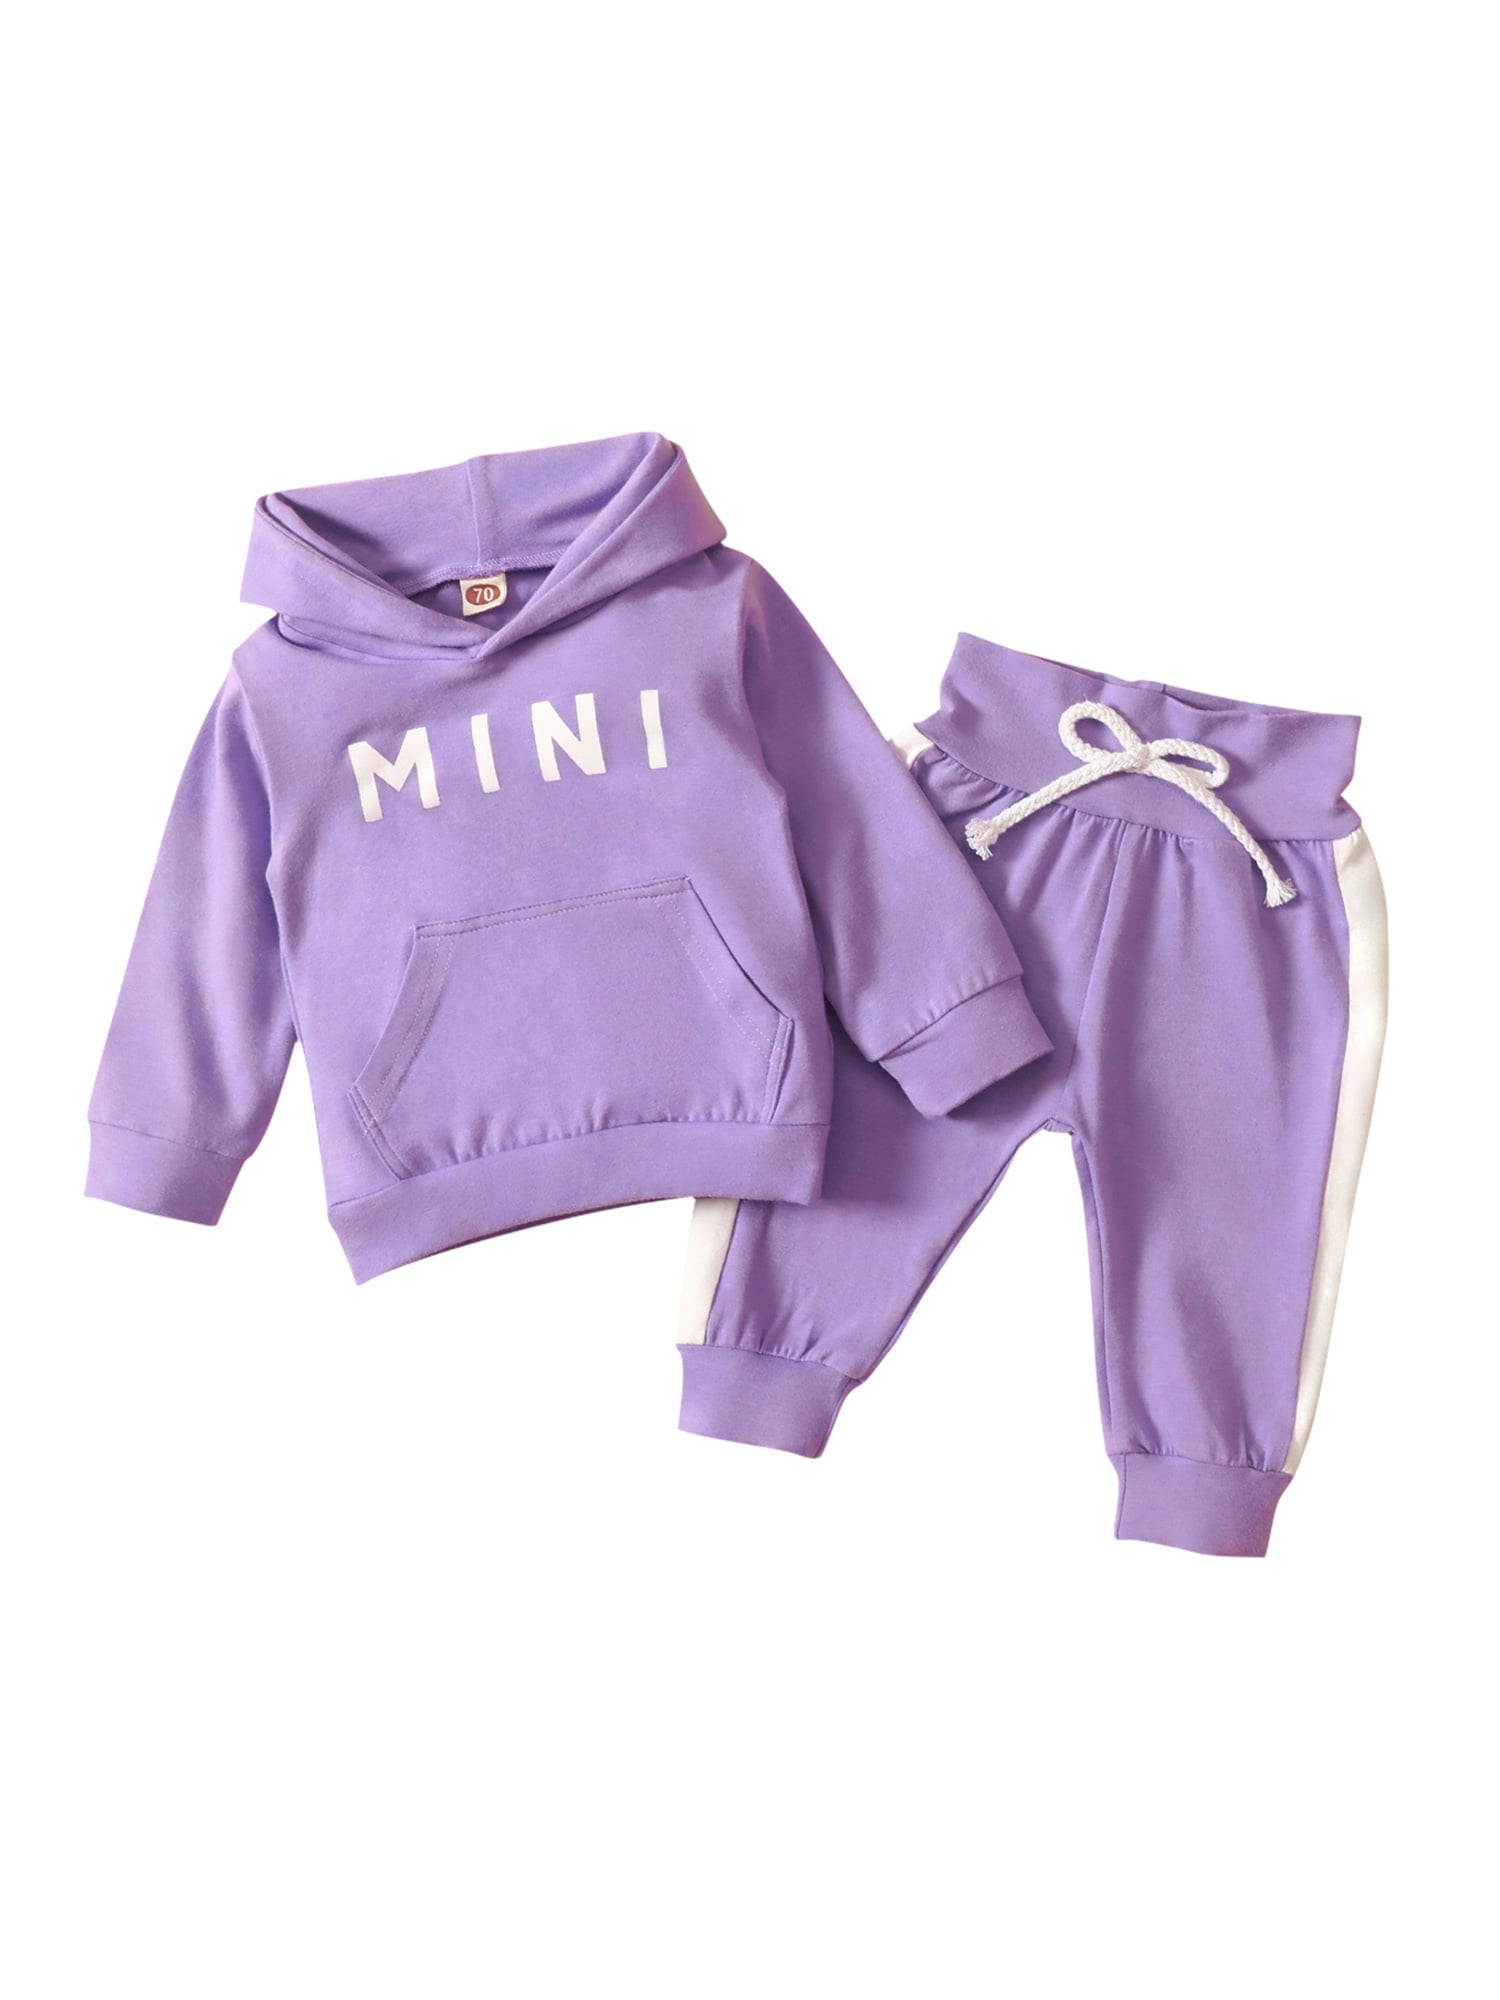 2pcs Kids Baby Girls Long Sleeve Pullover Sweatshirts Casual Tops Pants Outfits 